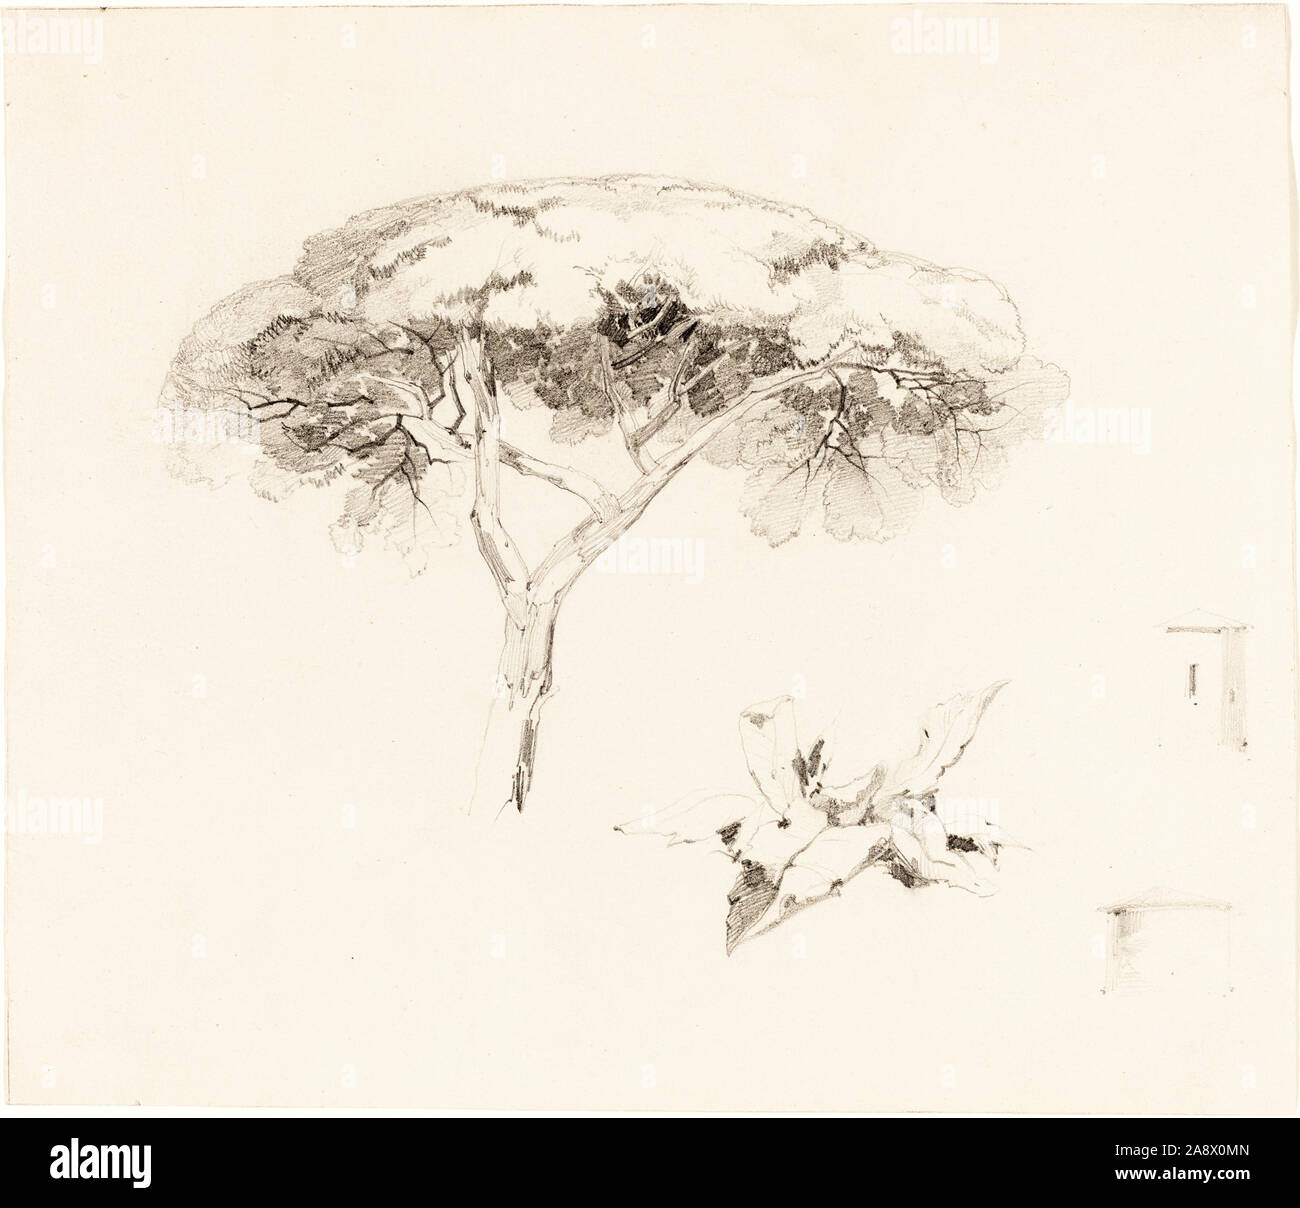 Edward Lear, Umbrella Pine and Other Studies, drawing, 1839-1845 Stock Photo